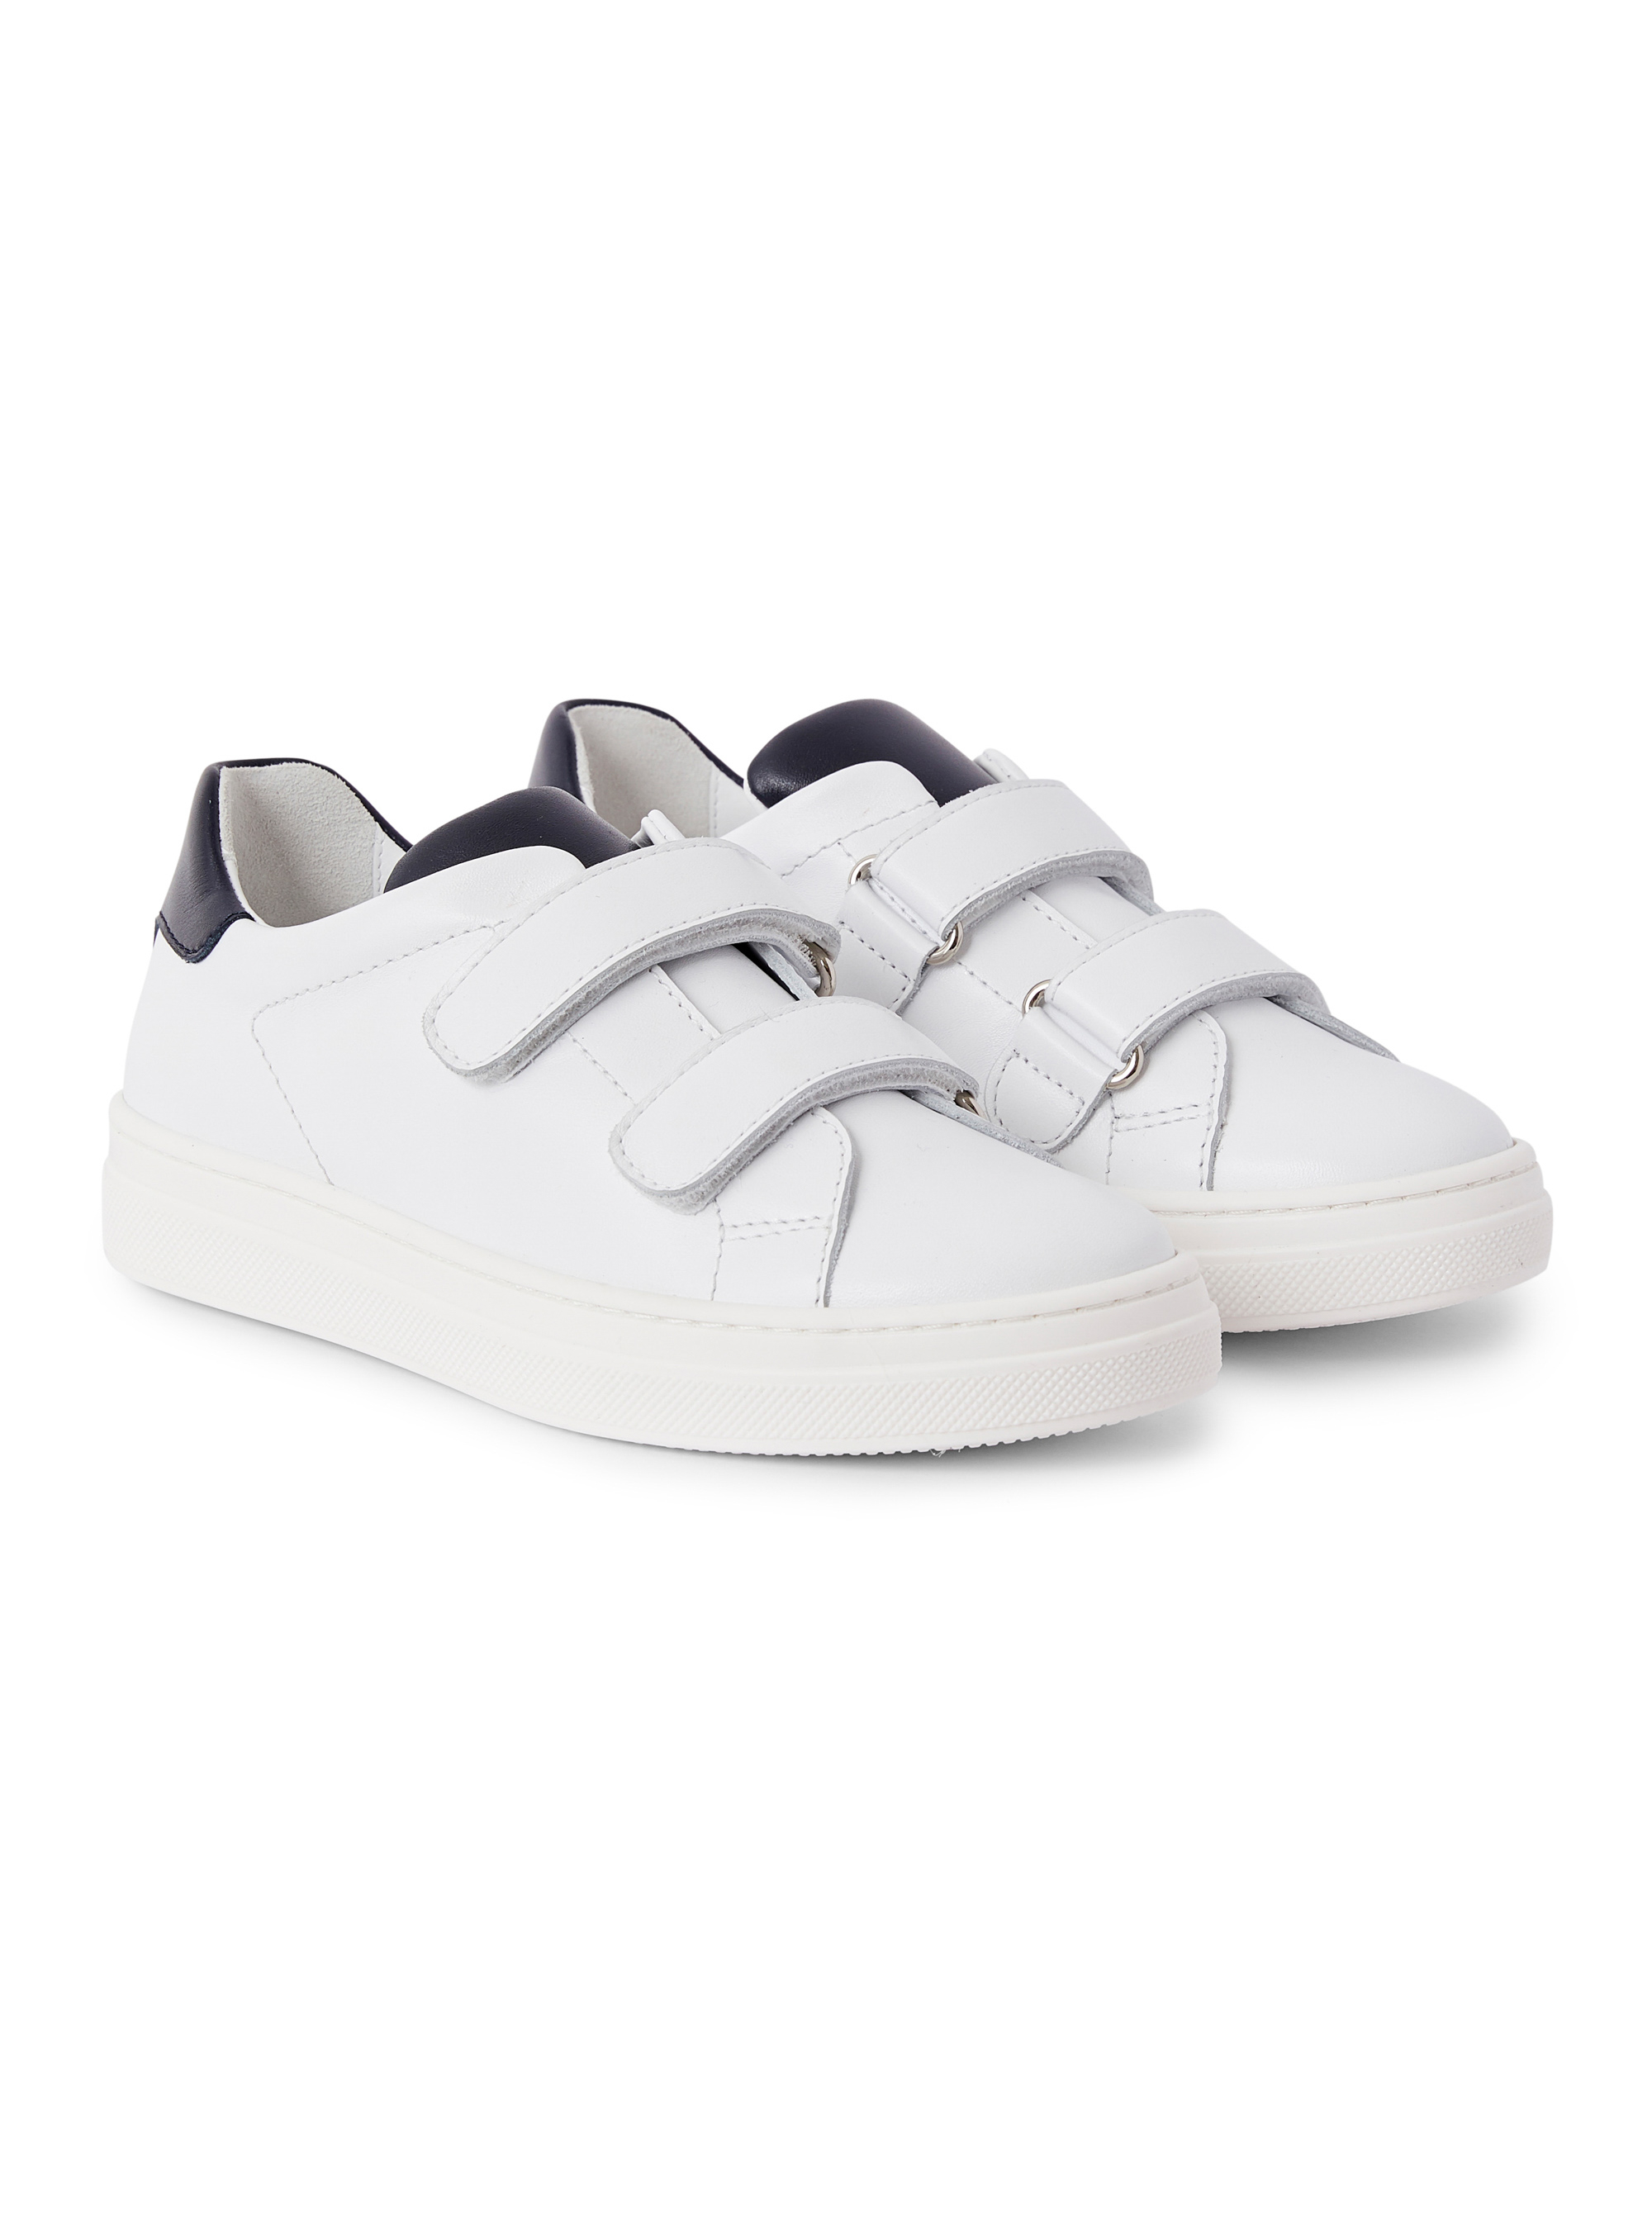 White and blue leather sneakers - Shoes - Il Gufo